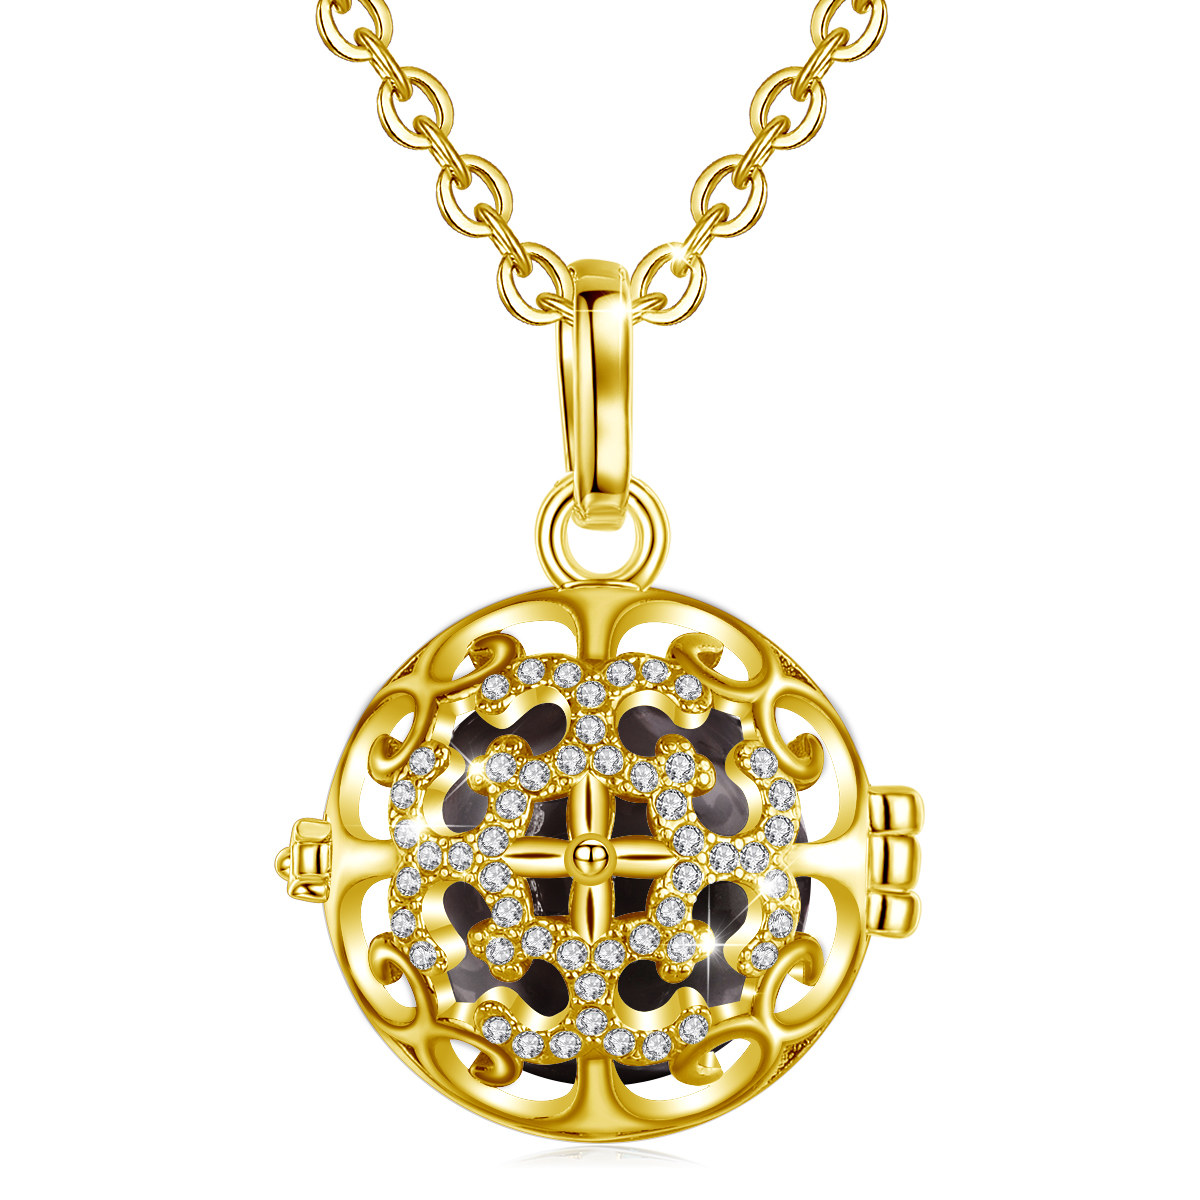 Gold Color Artificial zircon Pregnancy Belly Harmony Sound Ball Necklace for women